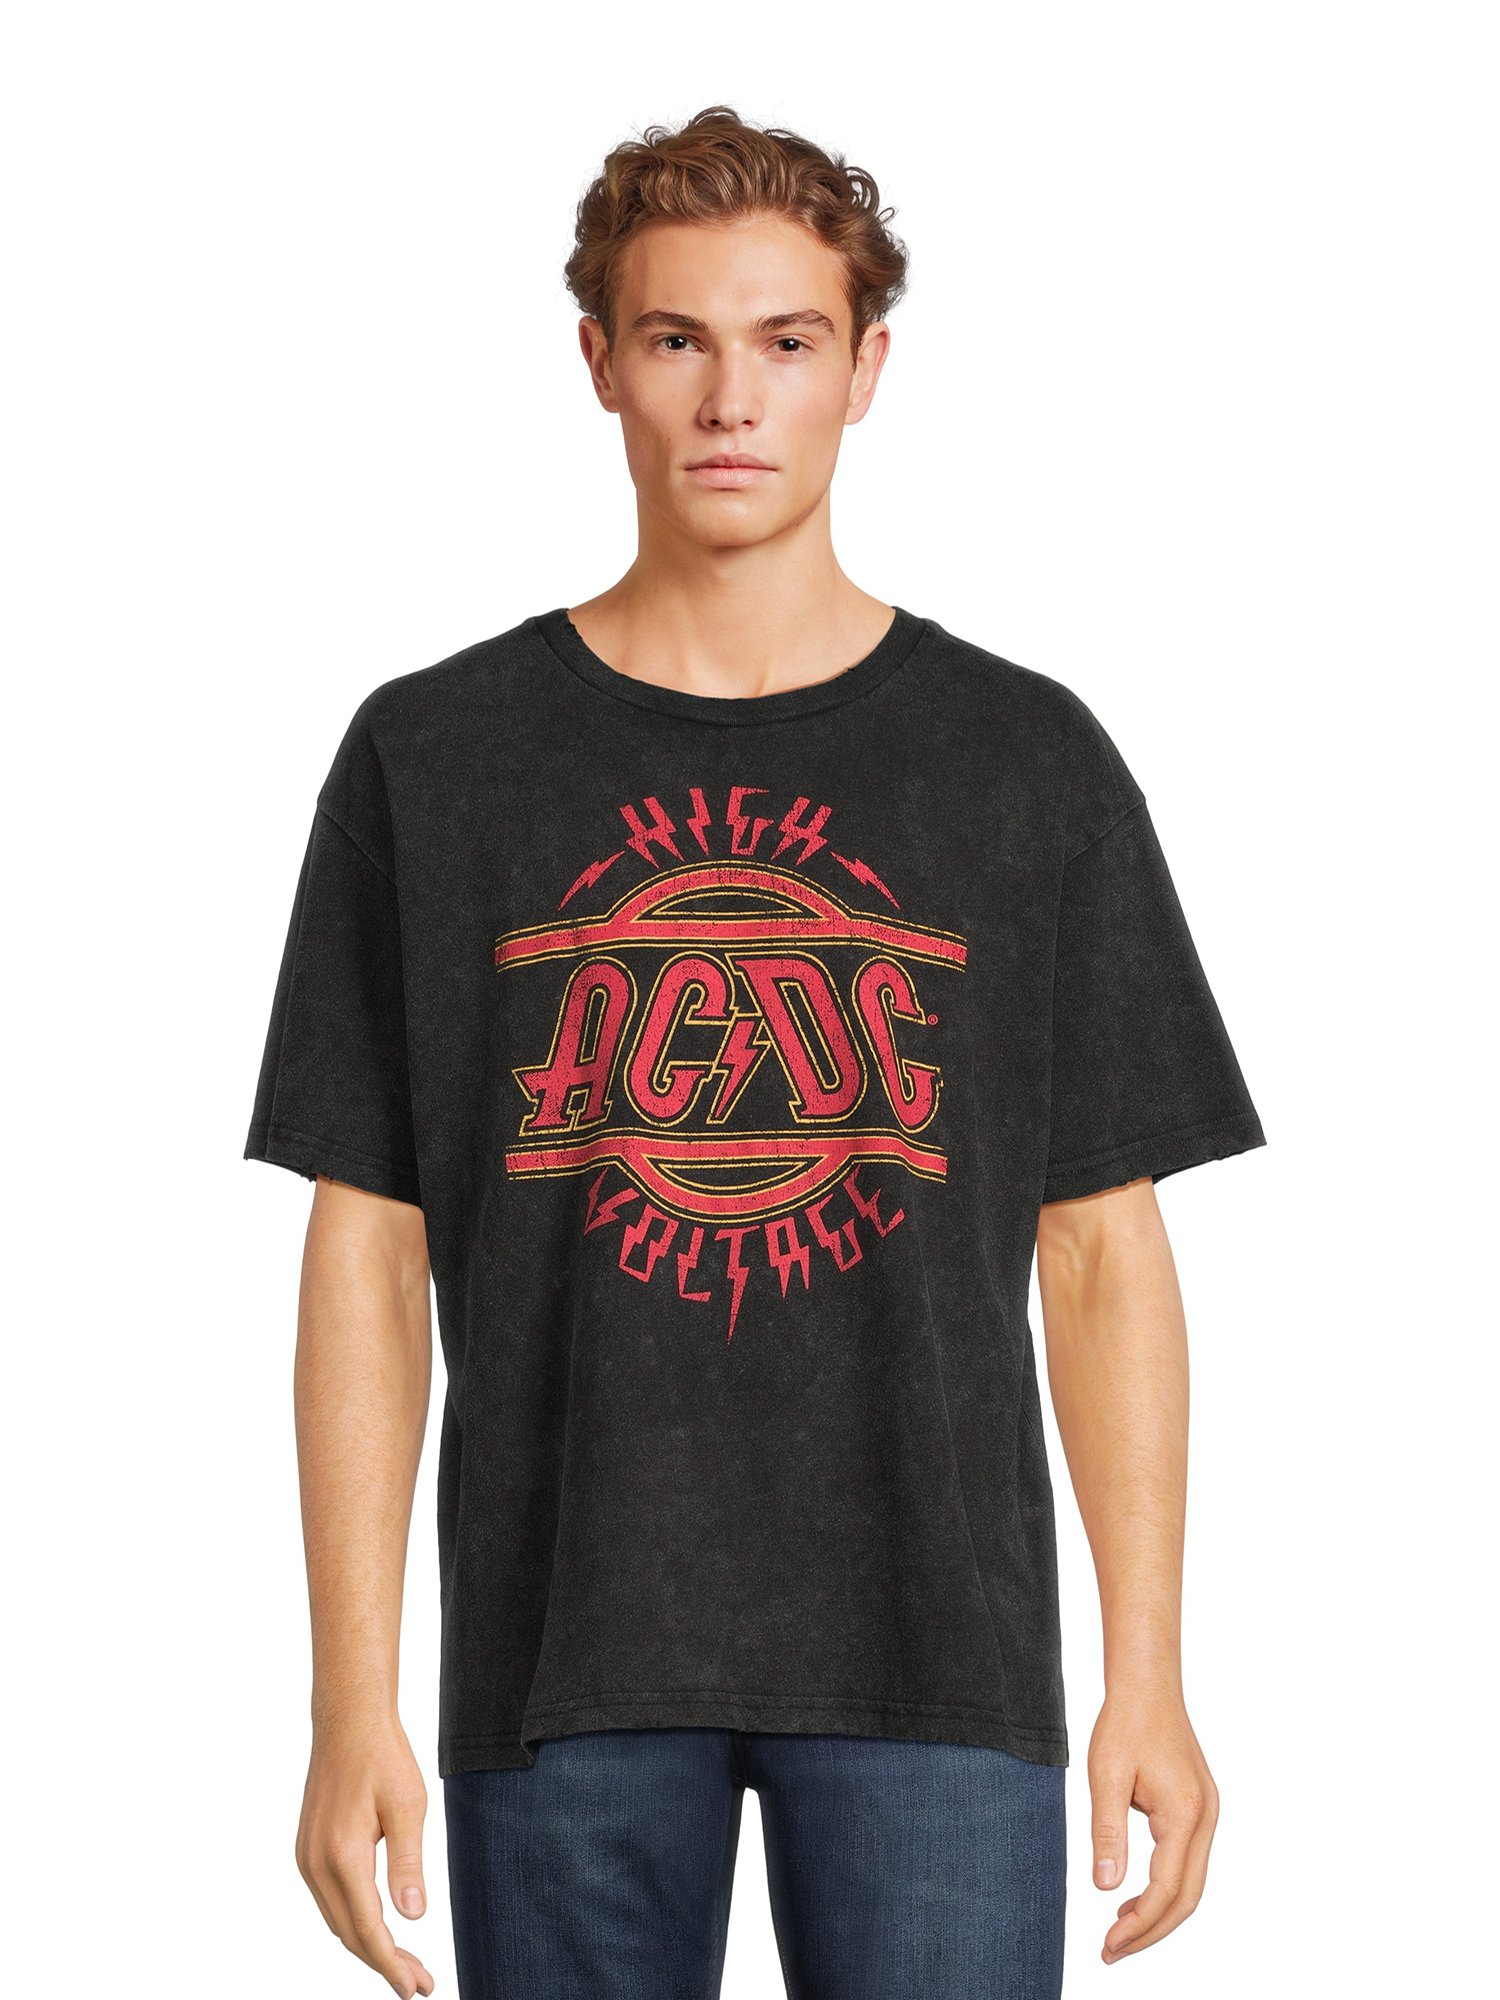 ACDC Men’s and Big Men’s Oversized Graphic Band Tee, Sizes XS-3XL - image 1 of 5